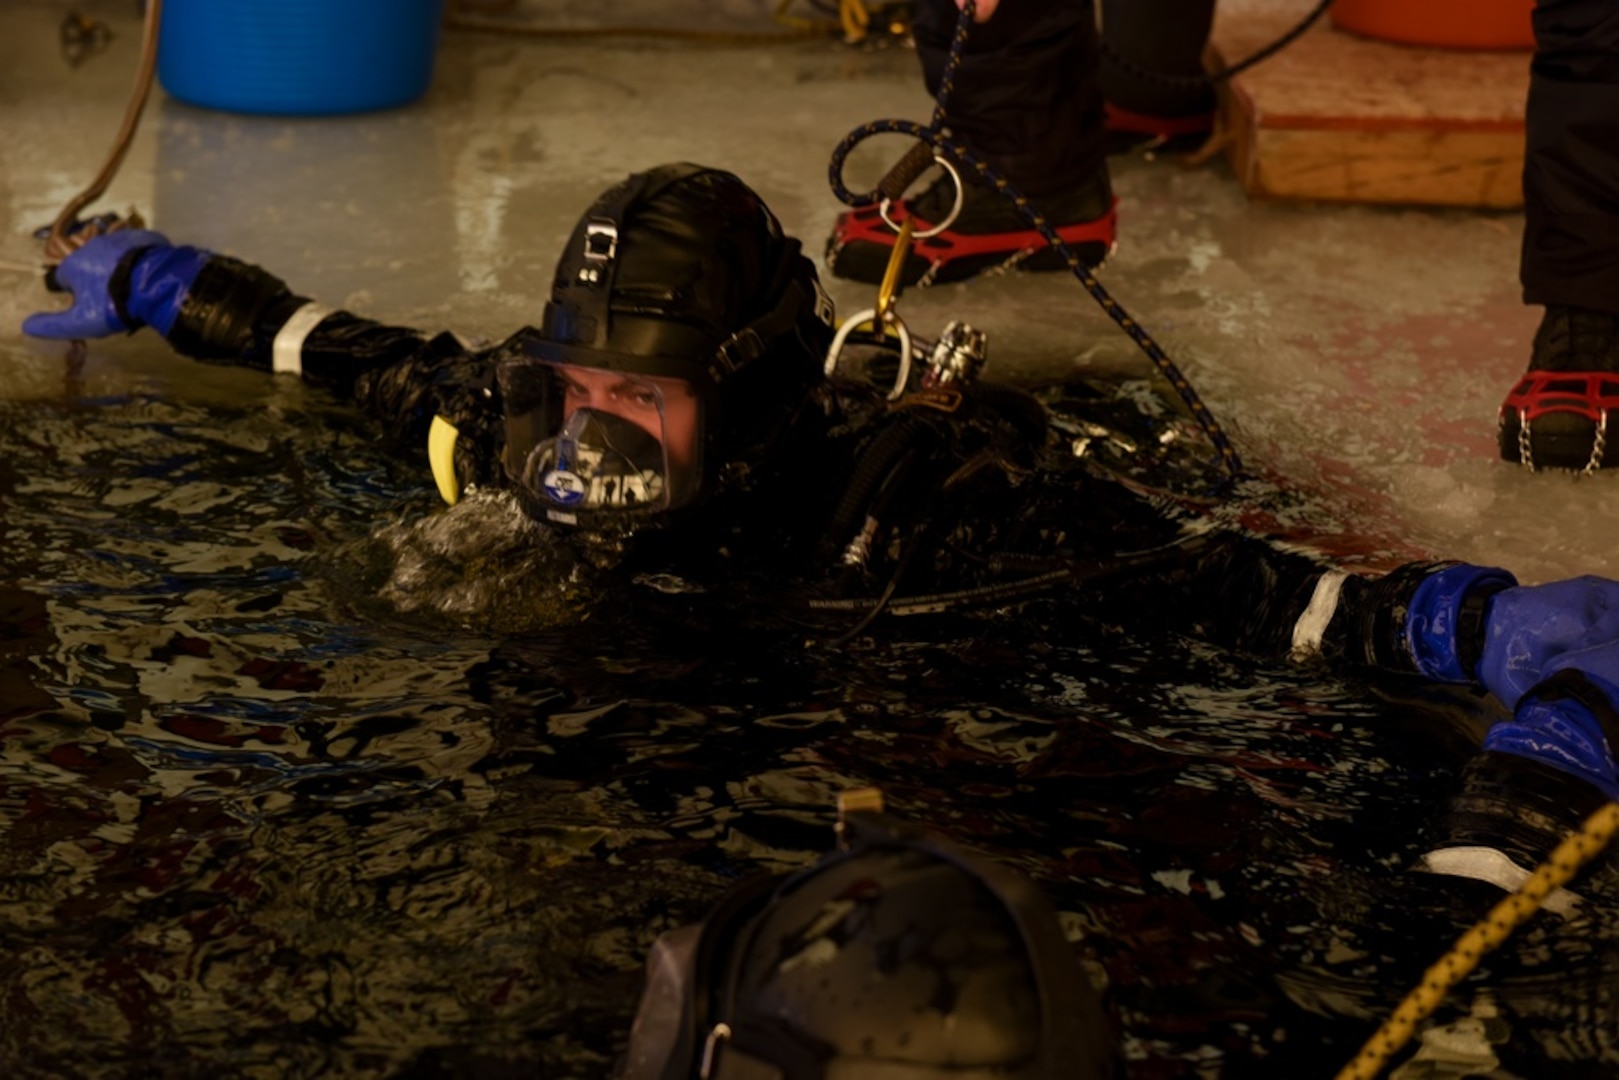 U.S. Coast Guard Petty Officer 2nd Class Samuel Wilson, a student in the Cold Water Ice Diving (CWID) course, resurfaces on Ferrell Lake, located on Camp Ripley, Feb. 3, 2022. Divers hold onto the edge of the ice until instructed to exit the water. (U.S. Coast Guard photo by Petty Officer 3rd Class Jessica Fontenette)